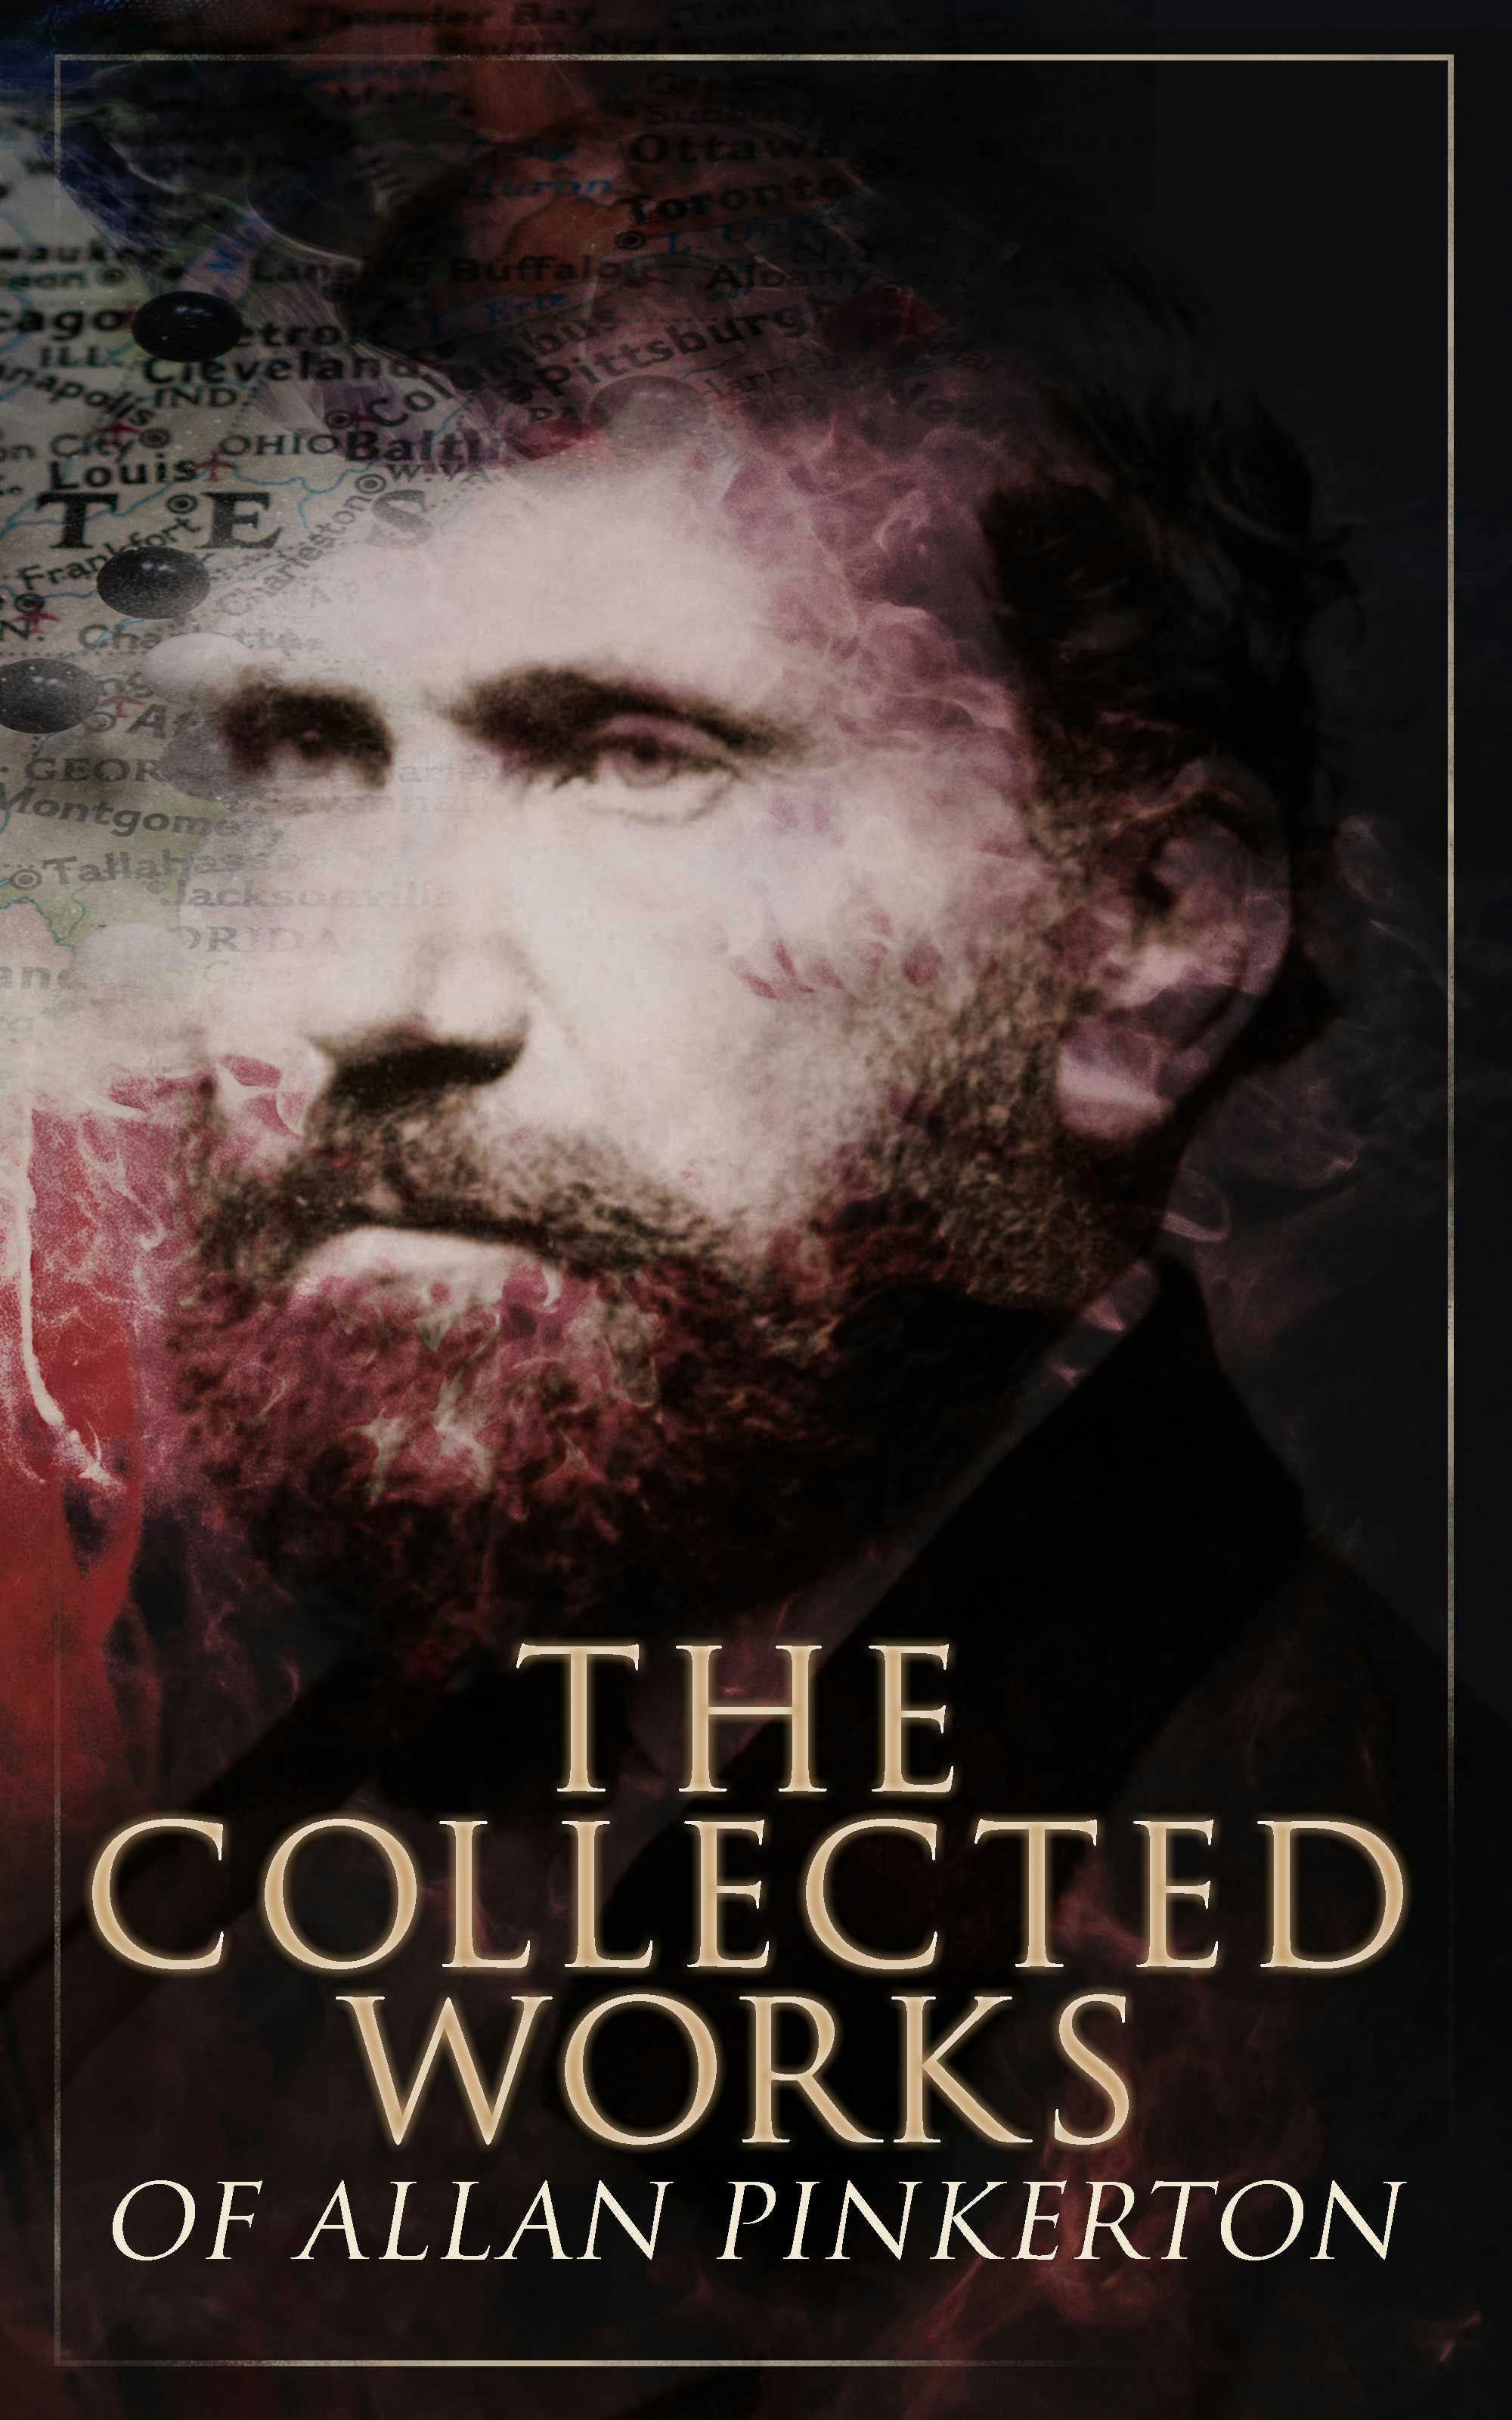 The Collected Works of Allan Pinkerton: True Crime Stories, Detective Tales & Spy Thrillers: The Expressman and the Detective, The Murderer and the Fortune Teller, The Spy of the Rebellion, The Burglar's Fate and the Detectives… - Allan Pinkerton